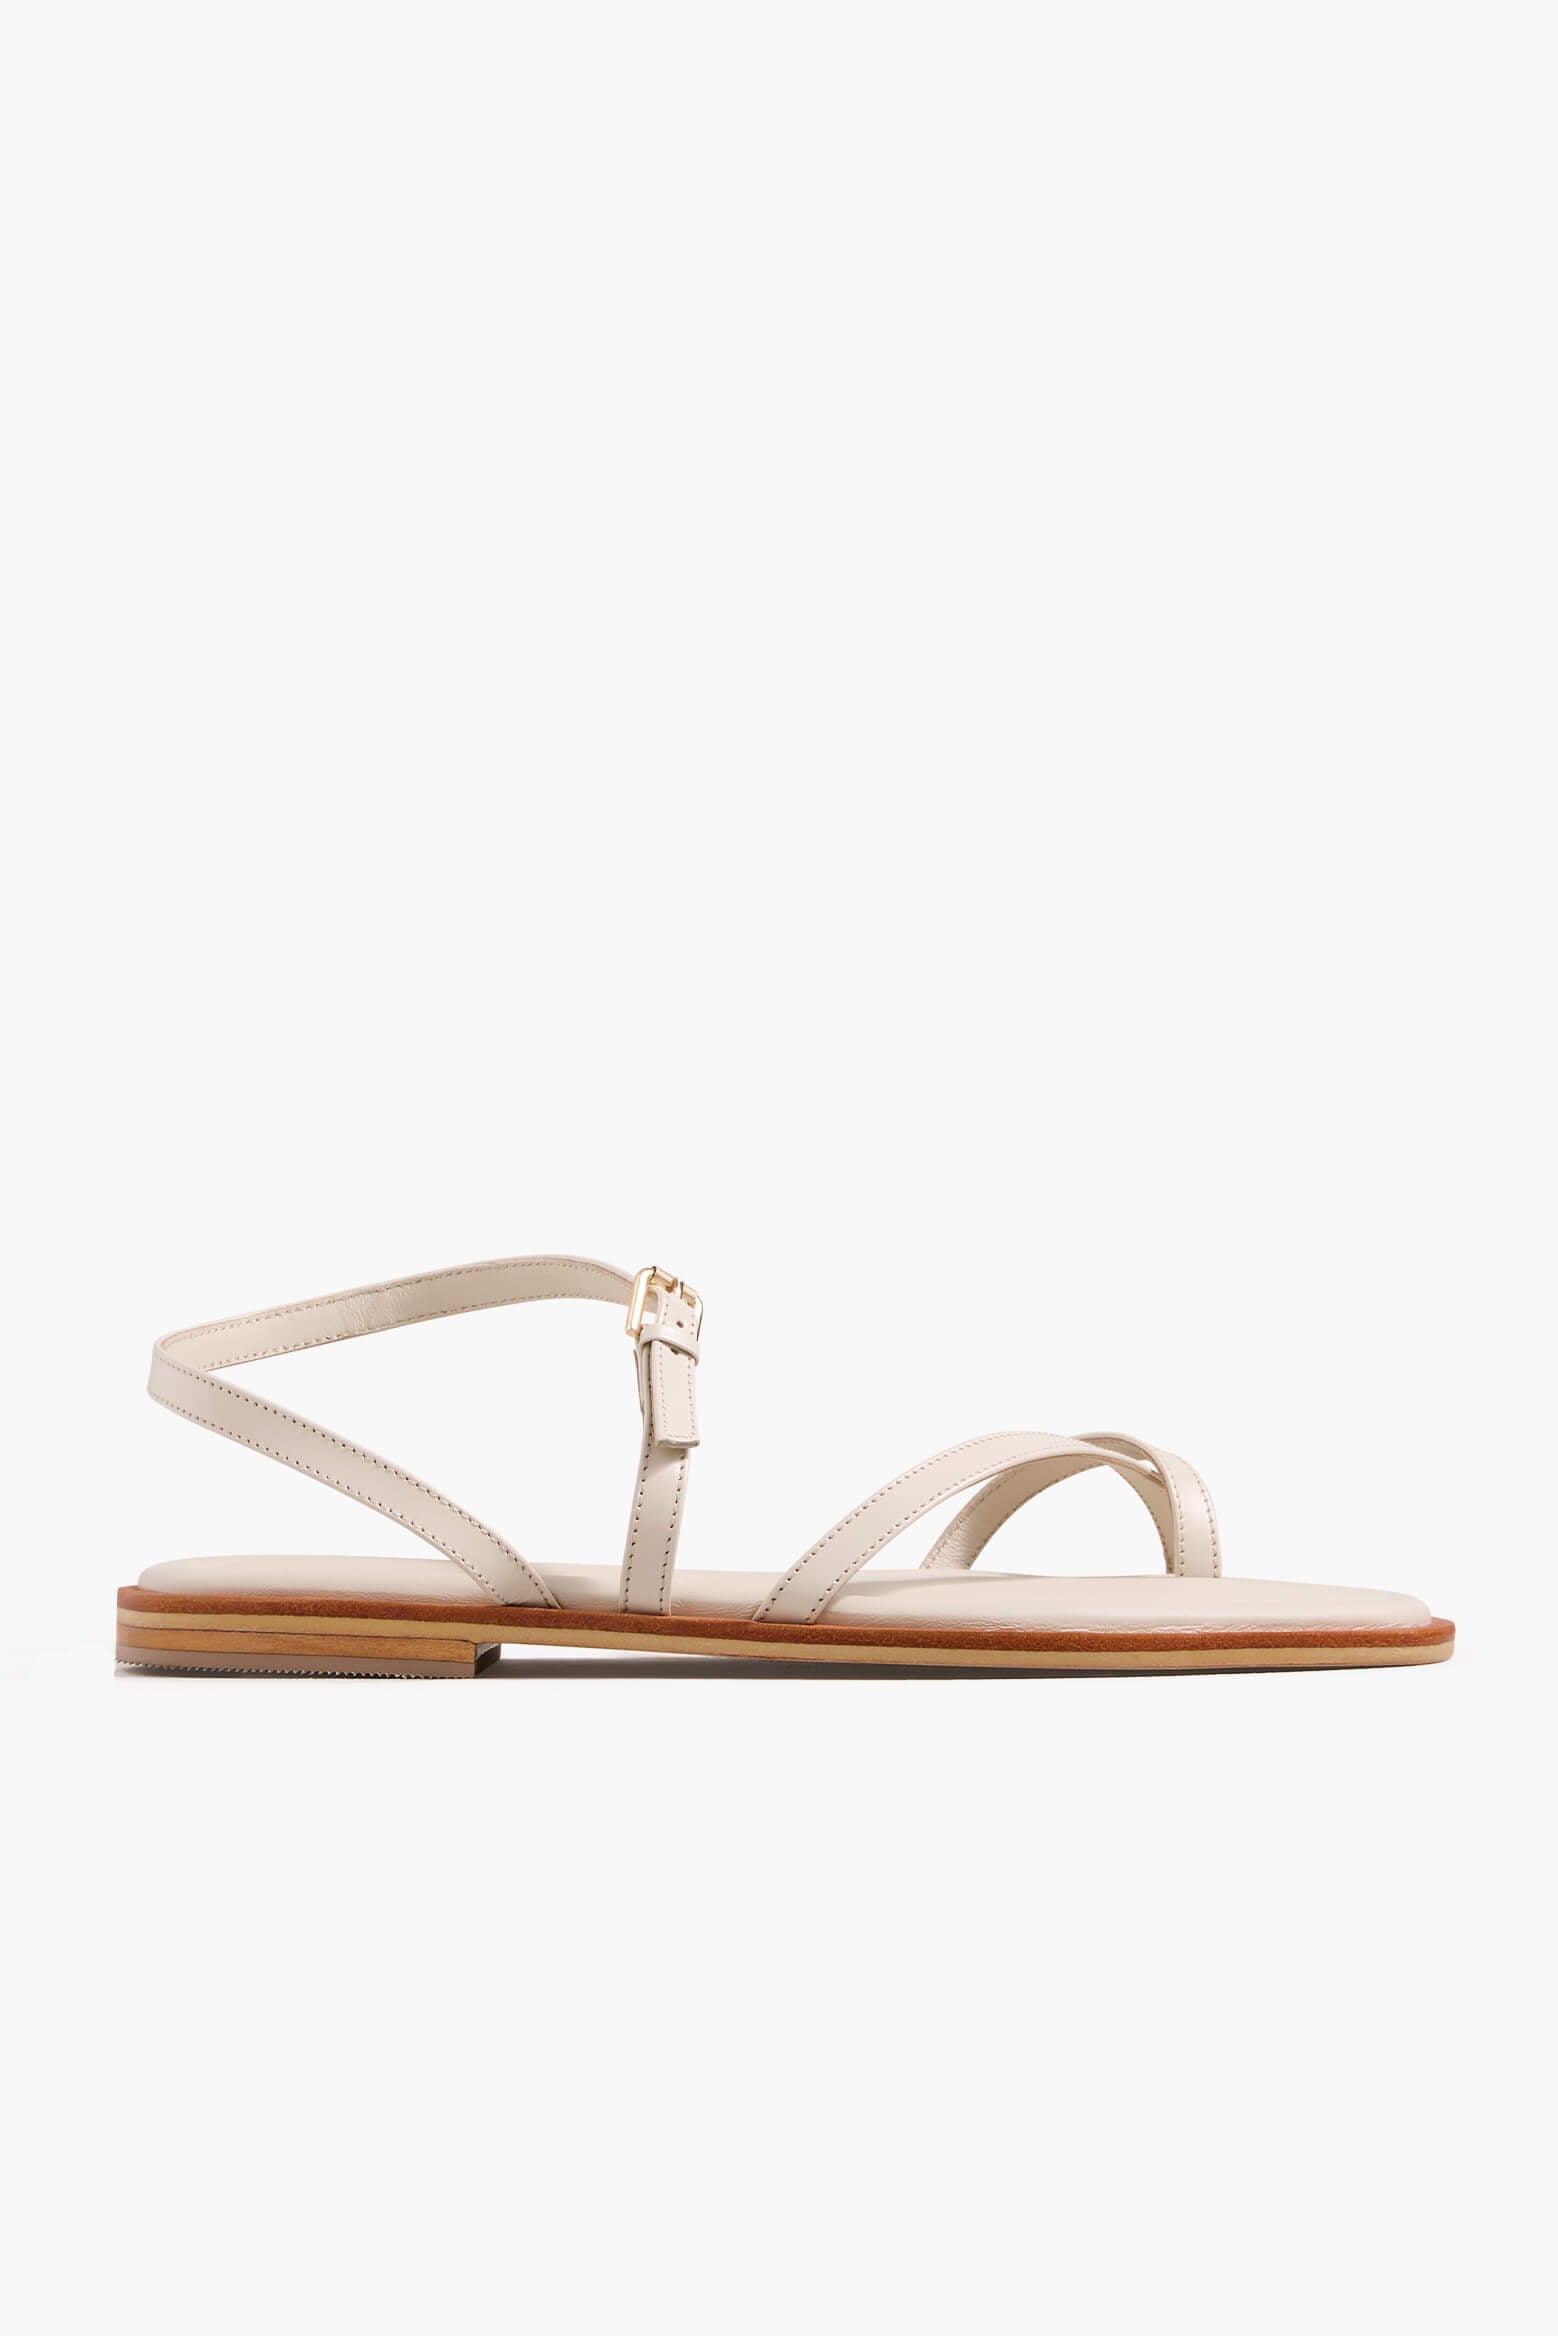 A.Emery Lucia Sandal in Eggshell available at The New Trend Australia.